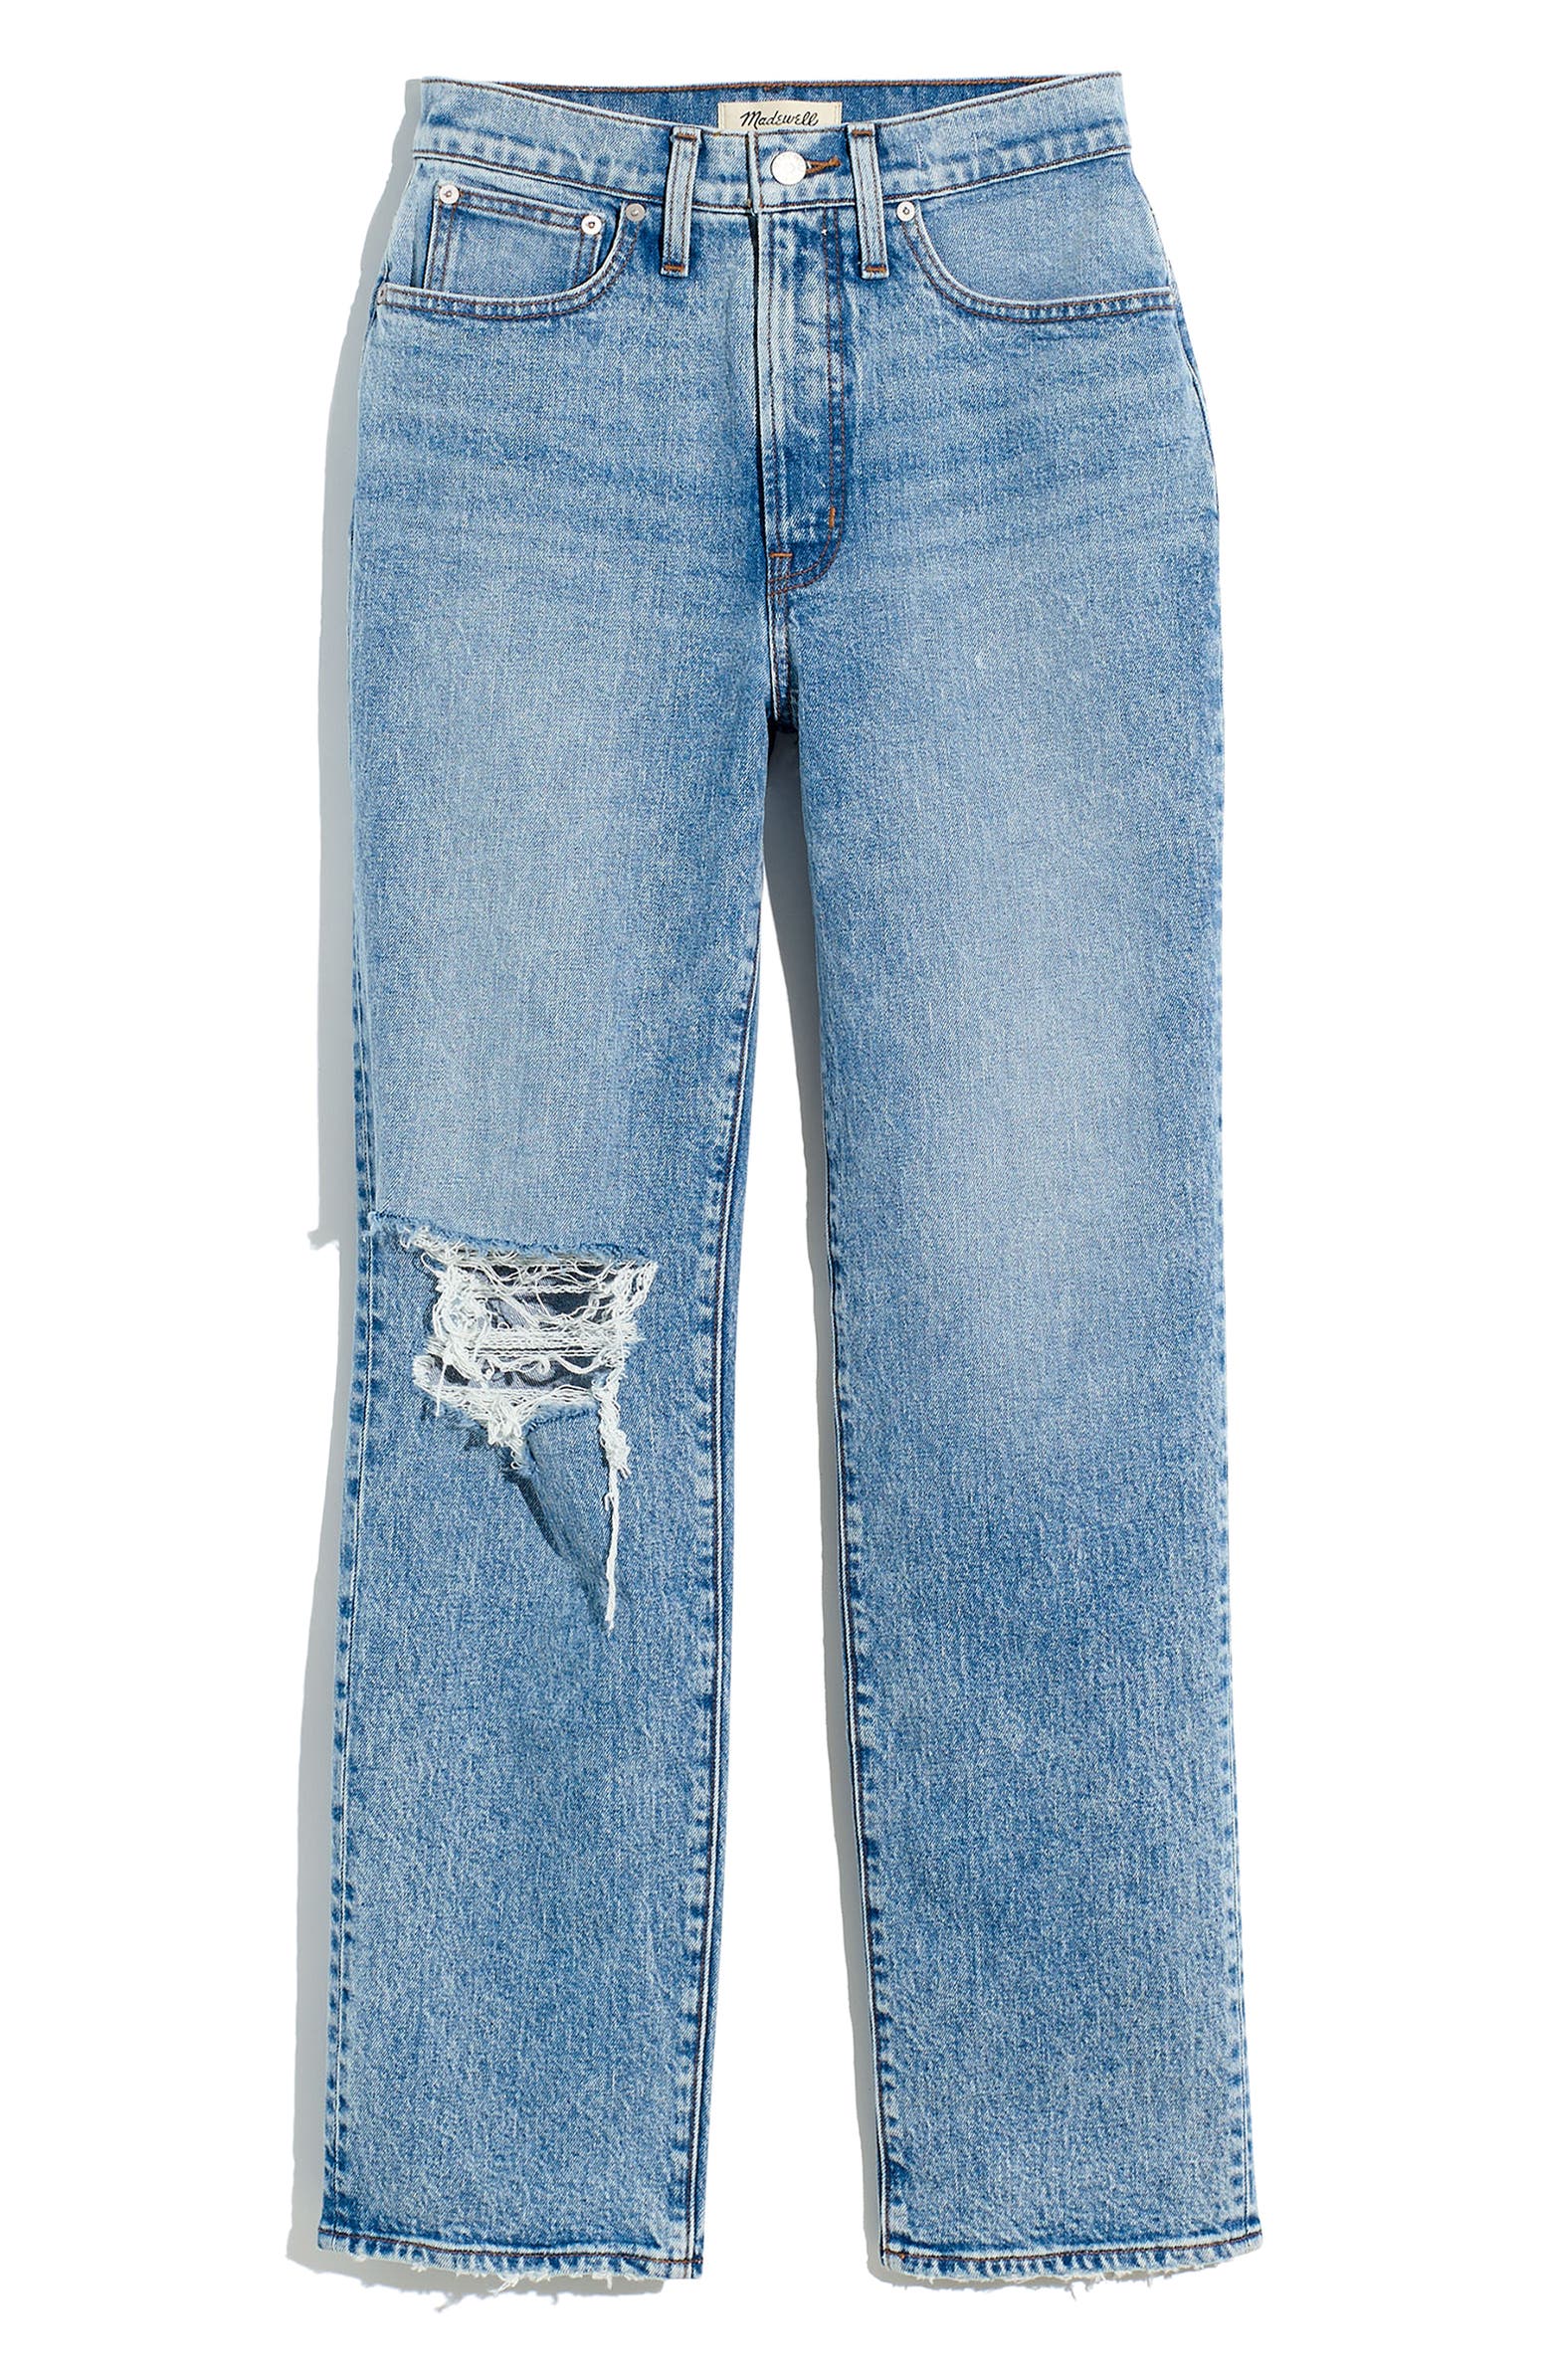 Madewell Straight Leg Stretch Cotton Jeans | Nordstrom